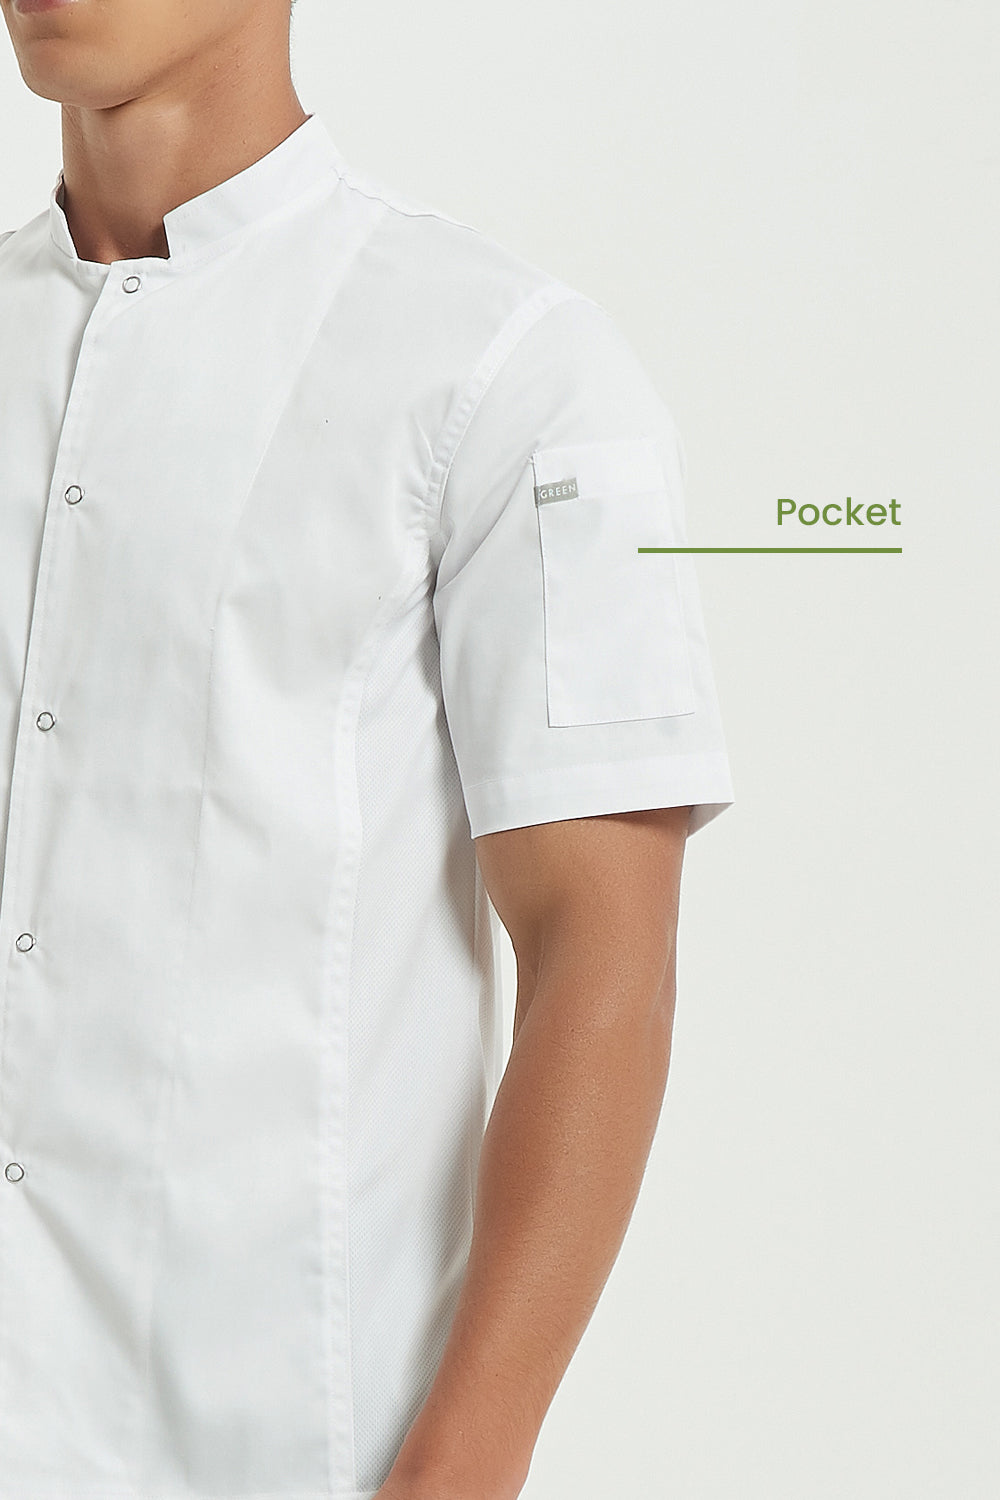 Mint White Chef Jacket with Dri-fit, Side View